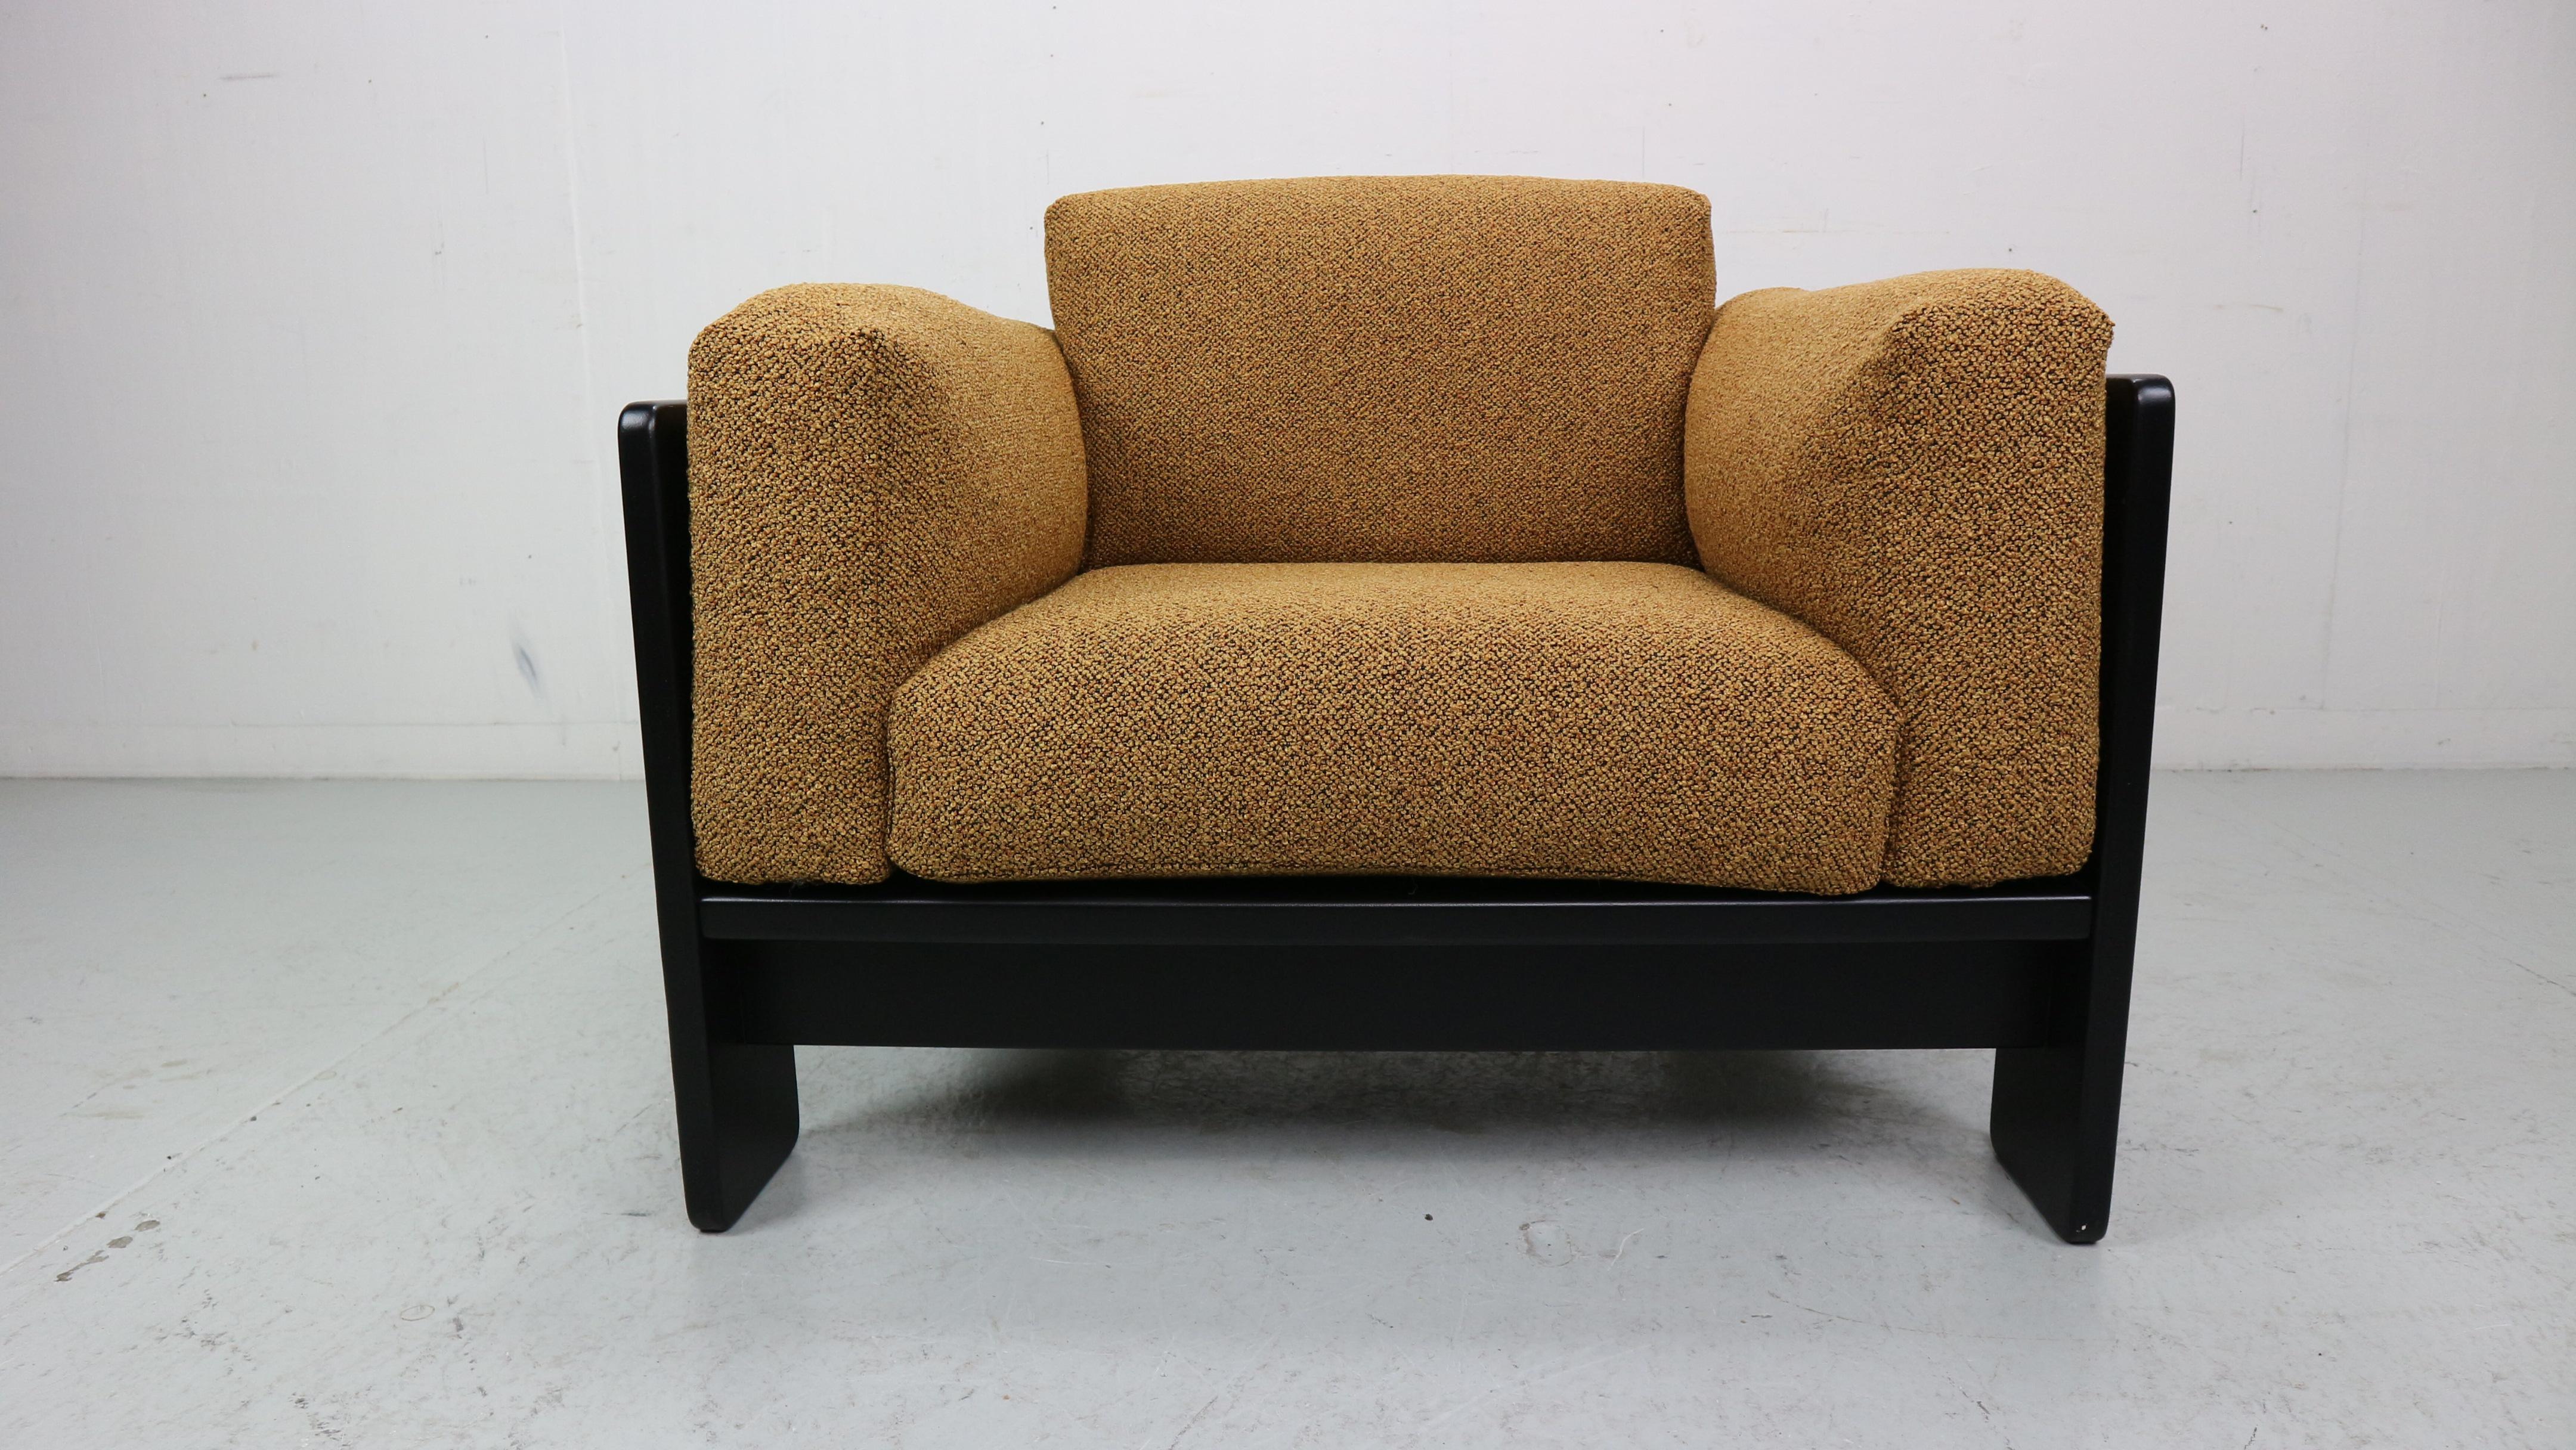 Bastiano armchair designed by Afra & Tobia Scarpa and produced by Gavina 1970s.
Black wooden structure with new boucle upholstery.
Afra & Tobia Scarpa designed the Bastiano series for the experimental design laboratory of Gavina in 1960s. About the